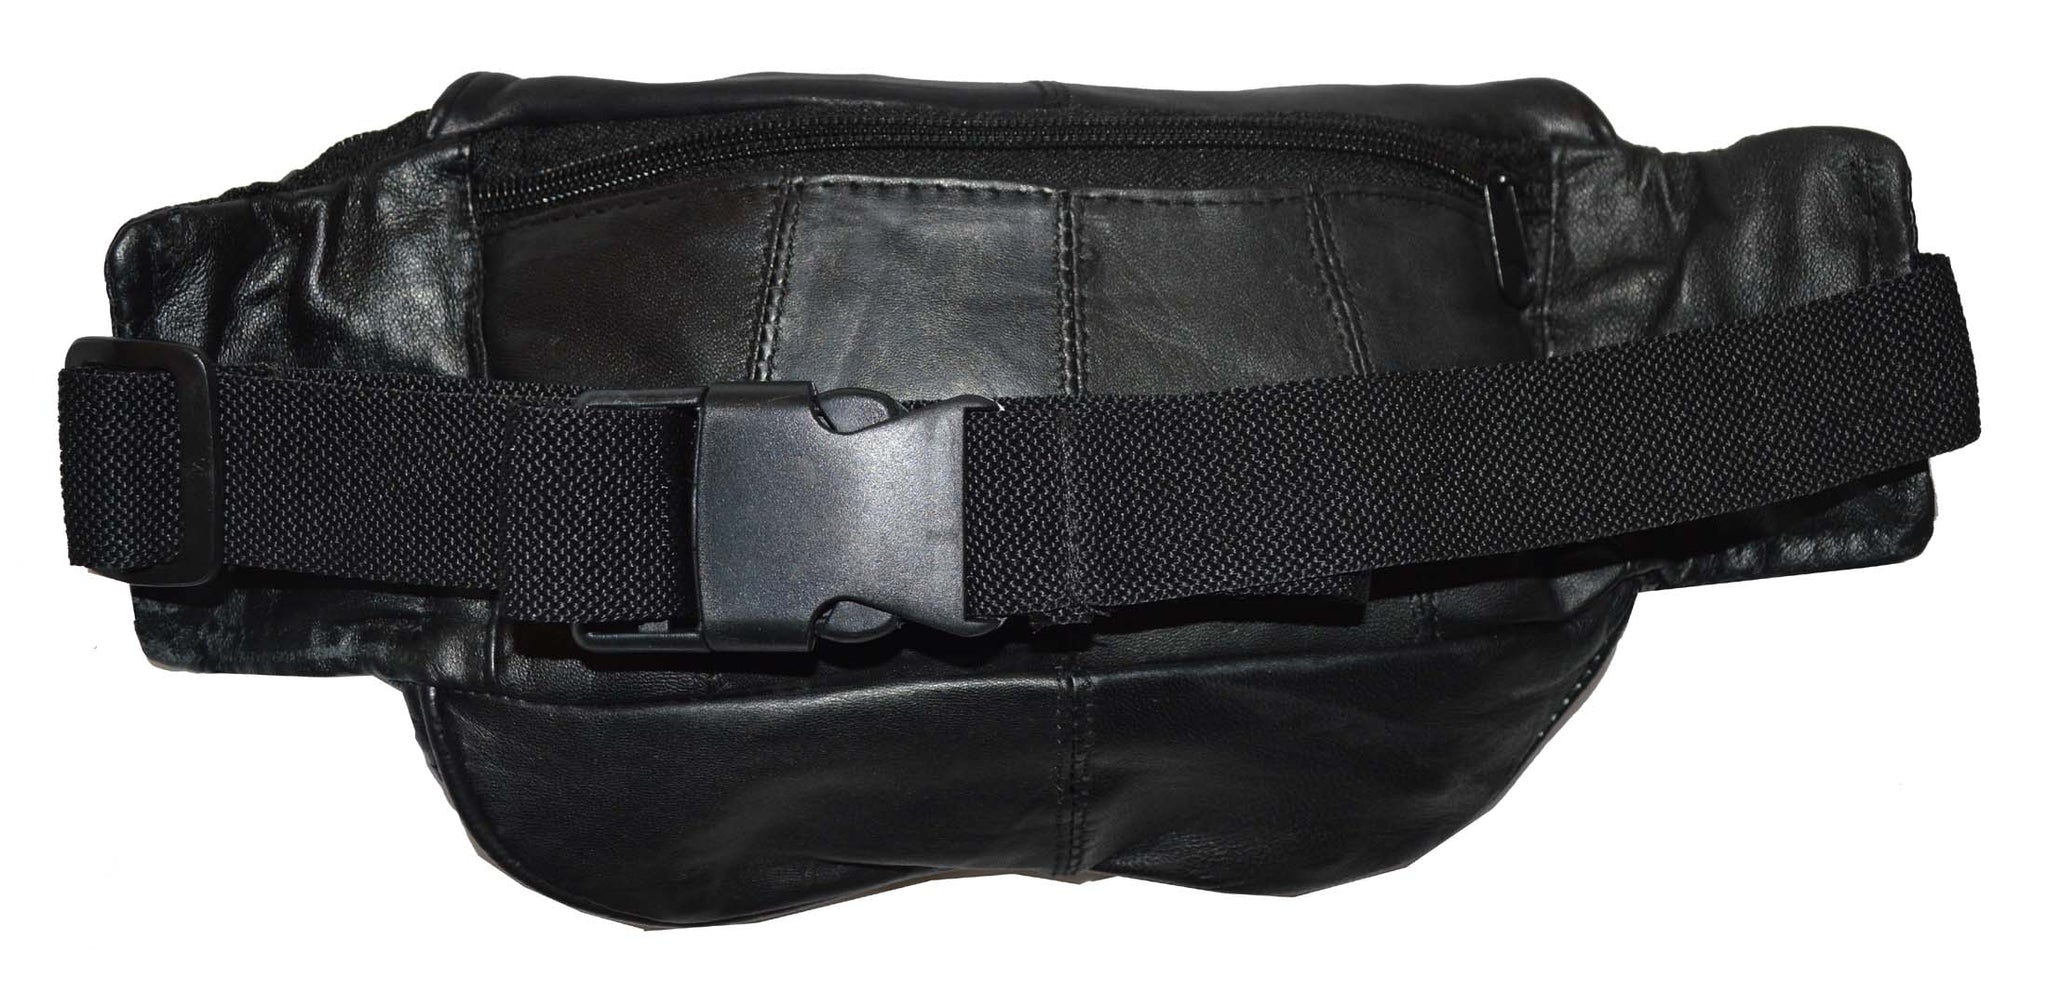 FANNY PACK NEW POPULAR STYLE GENUINE LEATHER 5 ZIPPERS GREAT GIFT IDEA